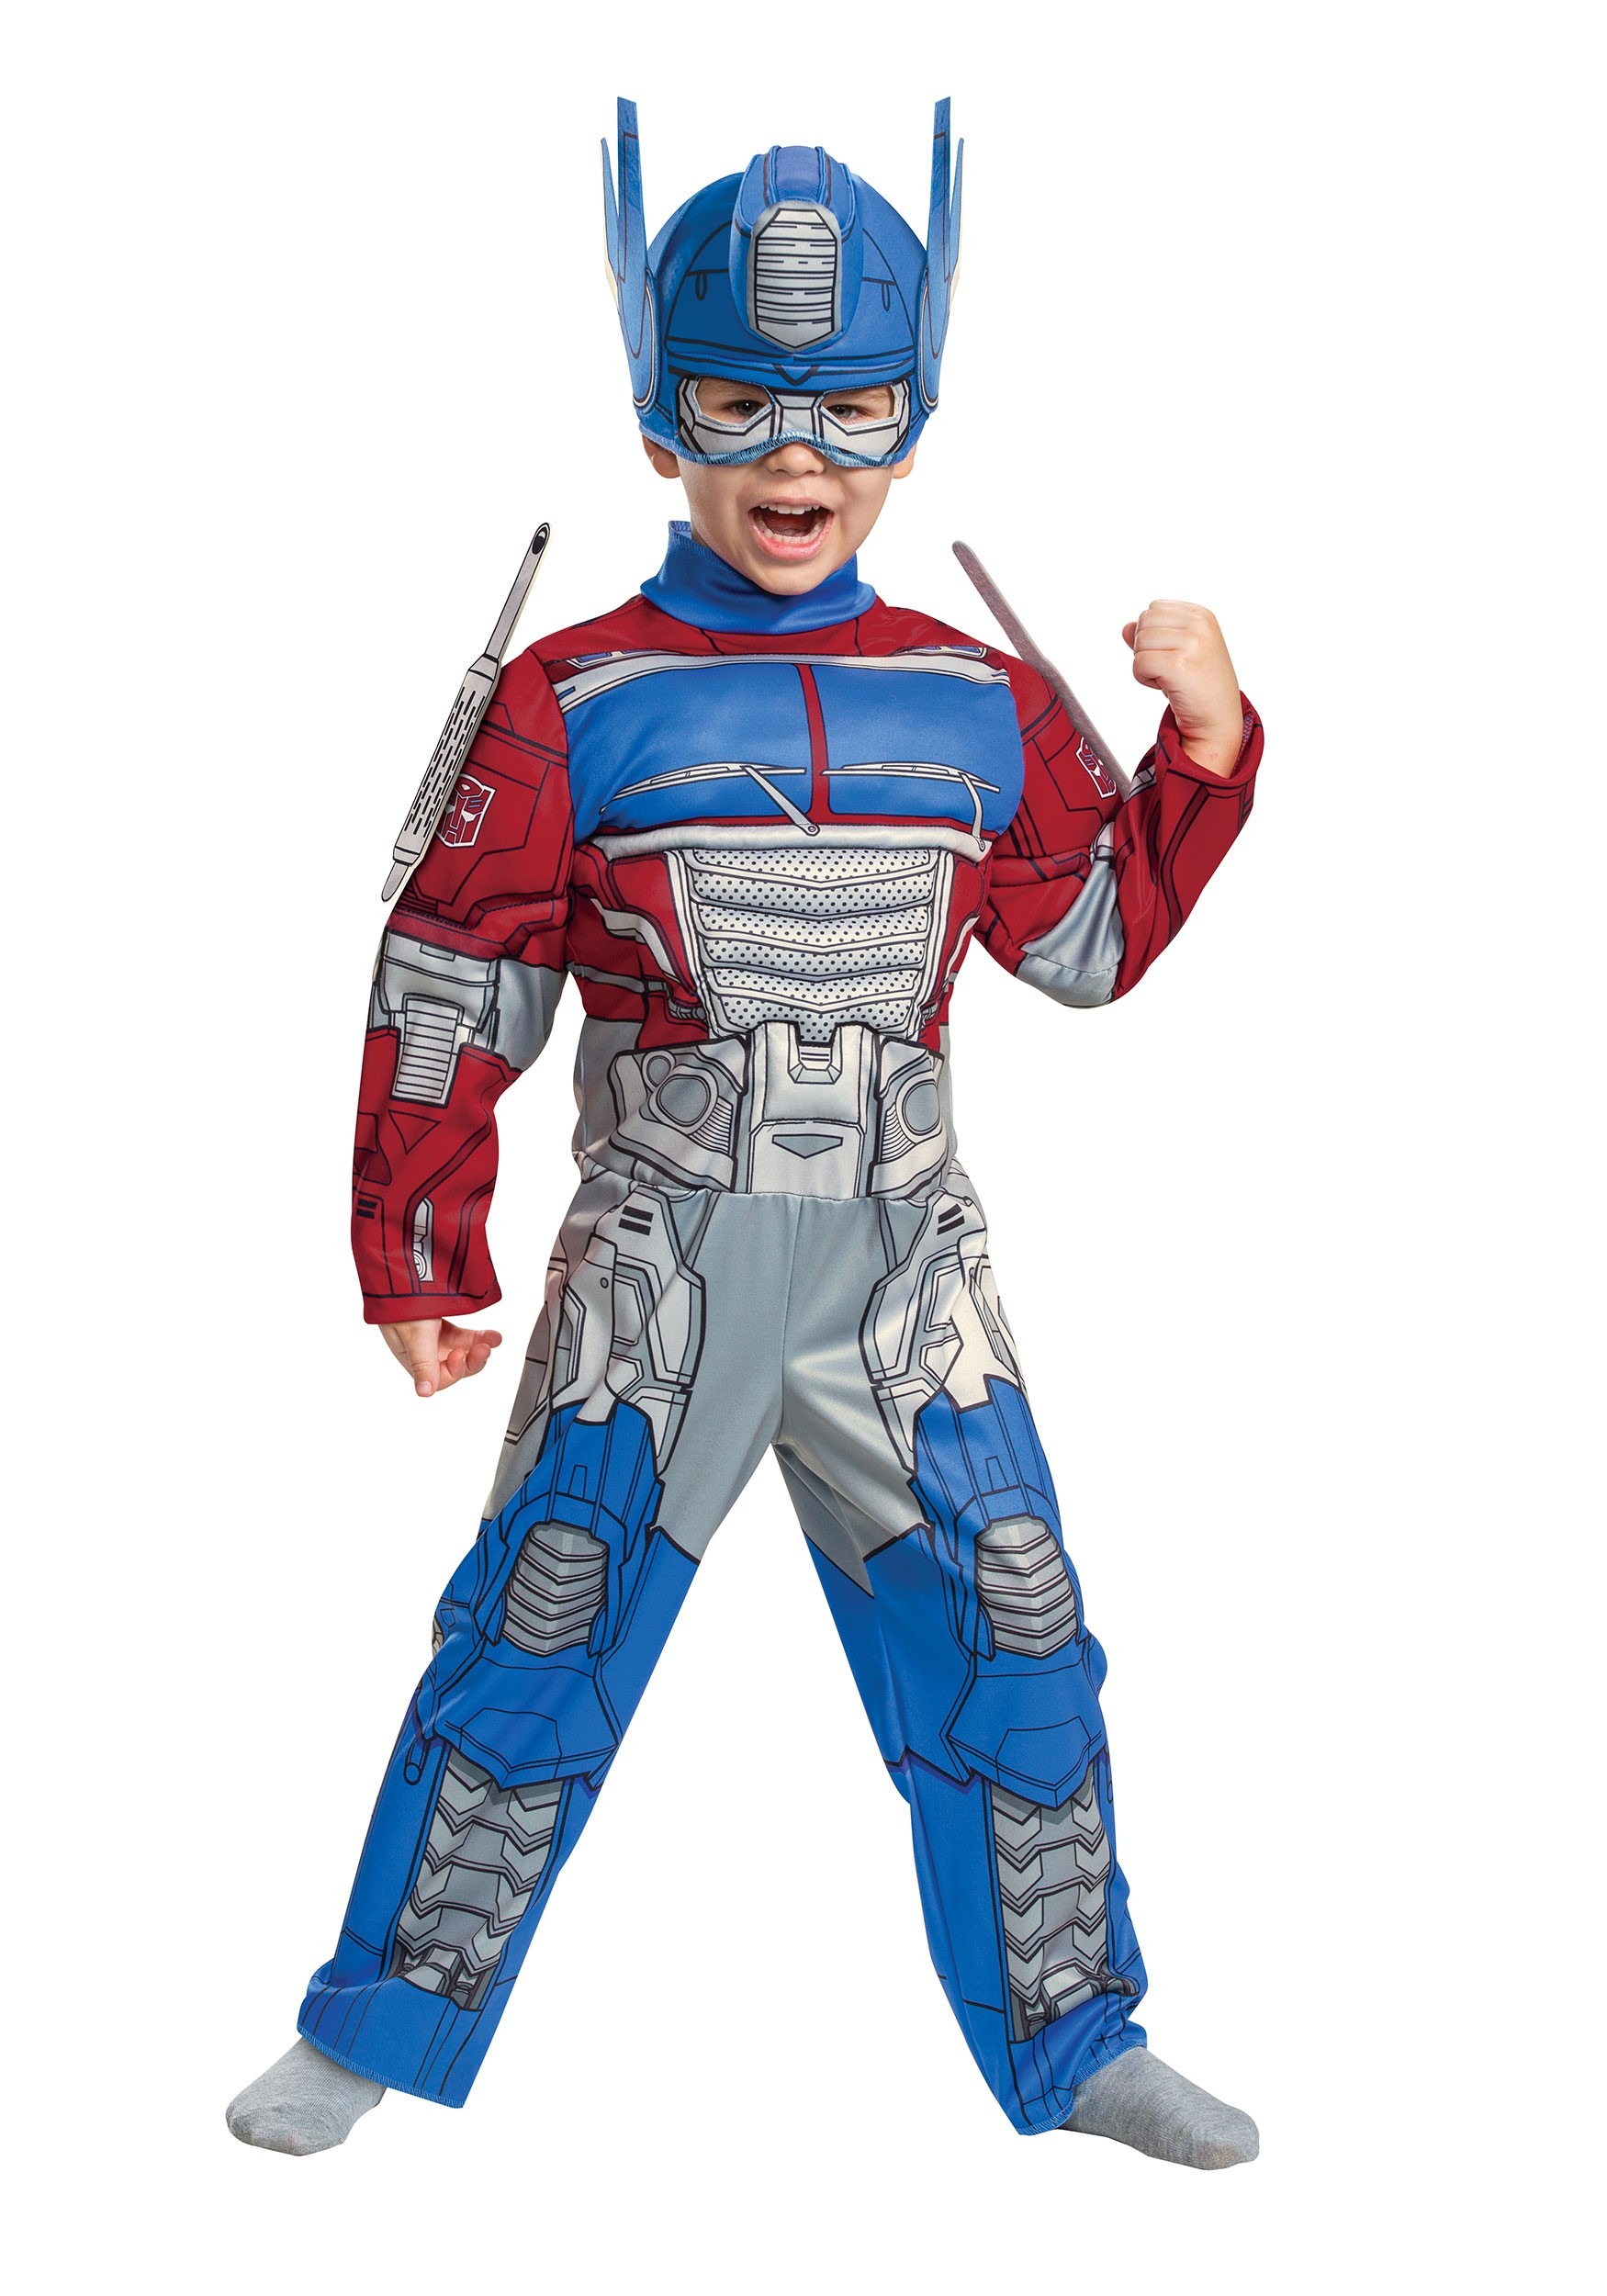 Photos - Fancy Dress Toddler Disguise Transformers Optimus Prime Costume For Toddlers Blue/Gray/ 